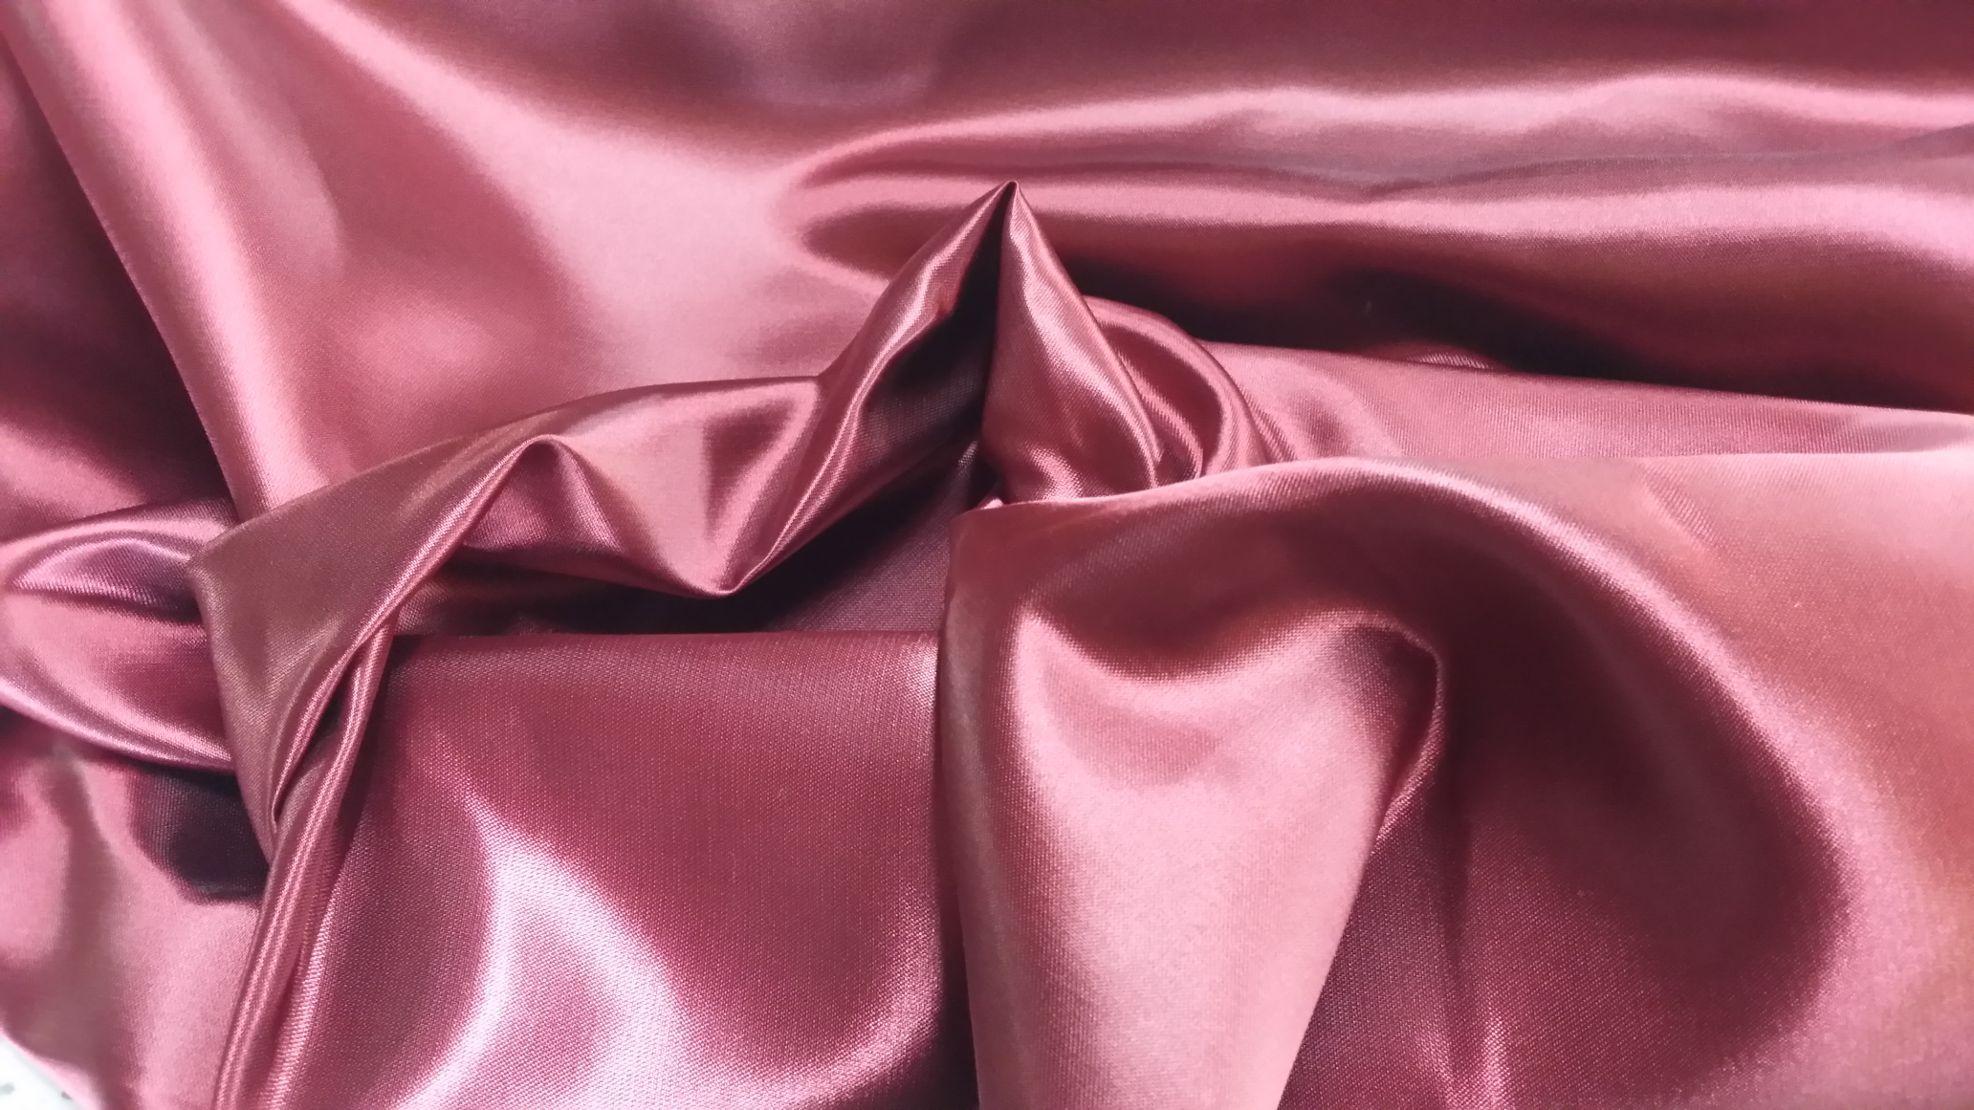 The Shining Satin Sheets and Textiles